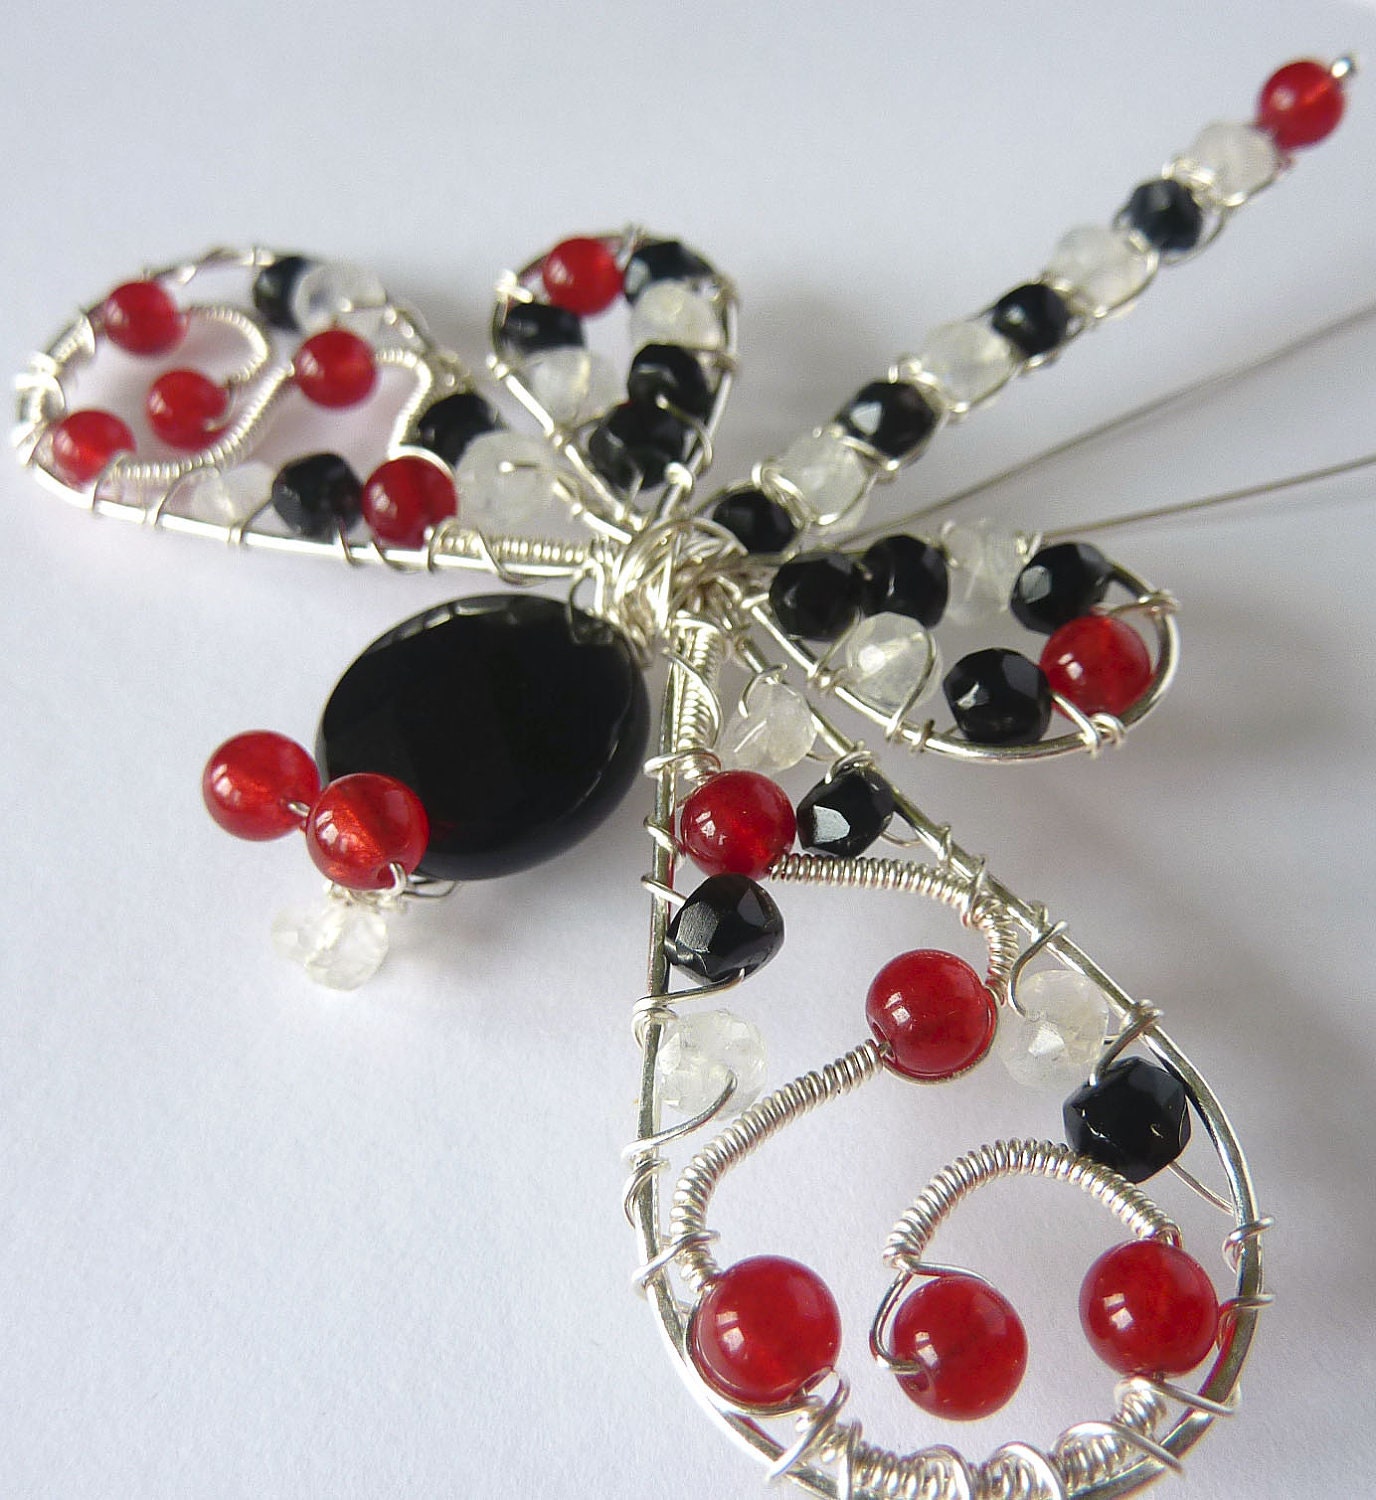 123 SALE - Black Onyx and Red Agate large ornate Sterling Dragonfly Hair Pin, Clip, Brooch or Bouquet Decoration